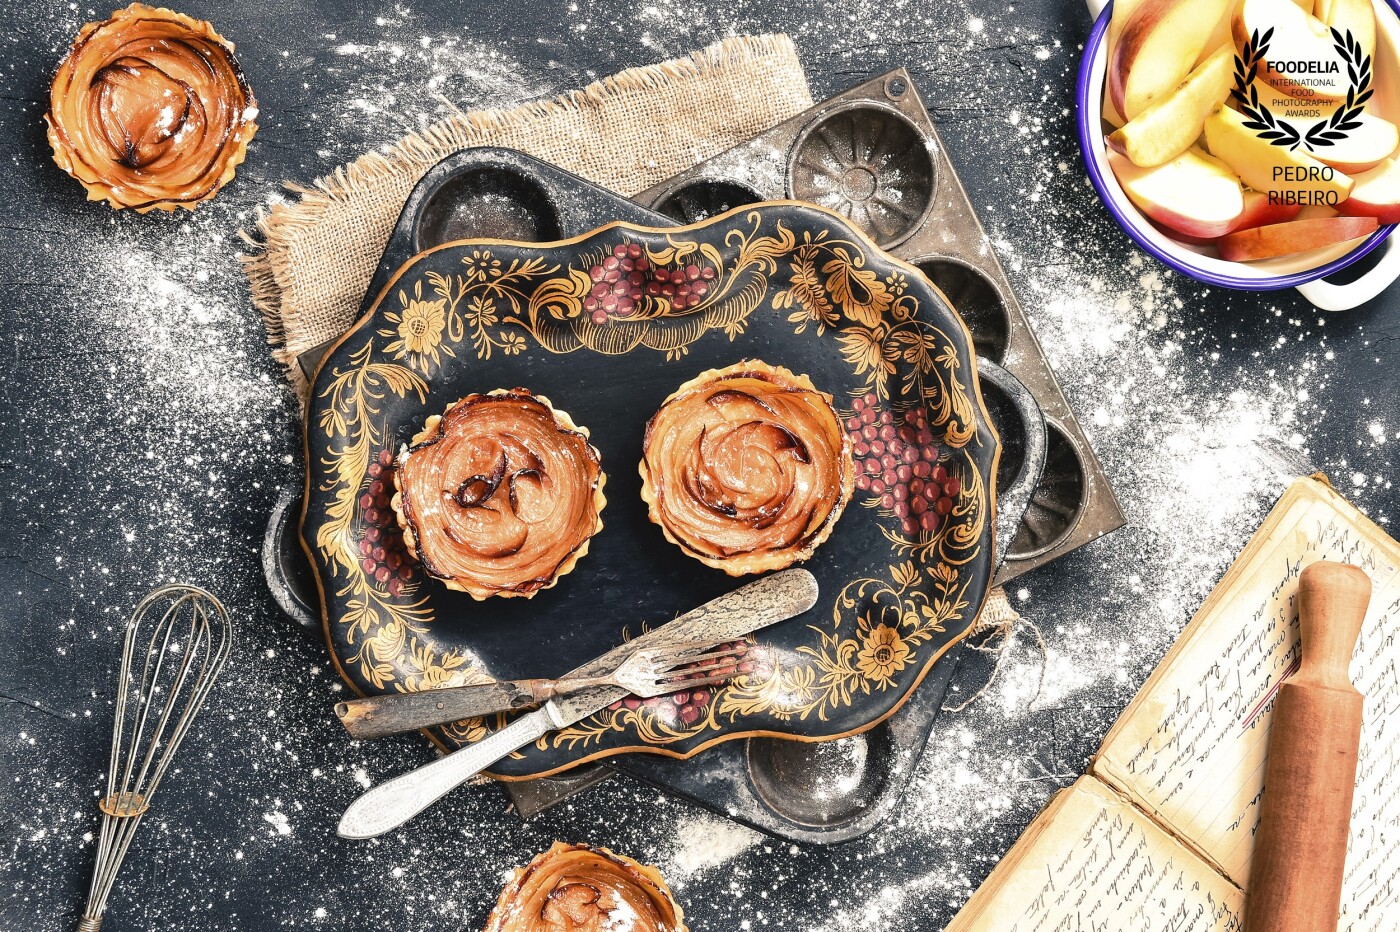 These are apple tarts, for a promotional photo shooting for a new shop  in Lisbon call Frutaria Bristol located near the são Jorge Caslte.